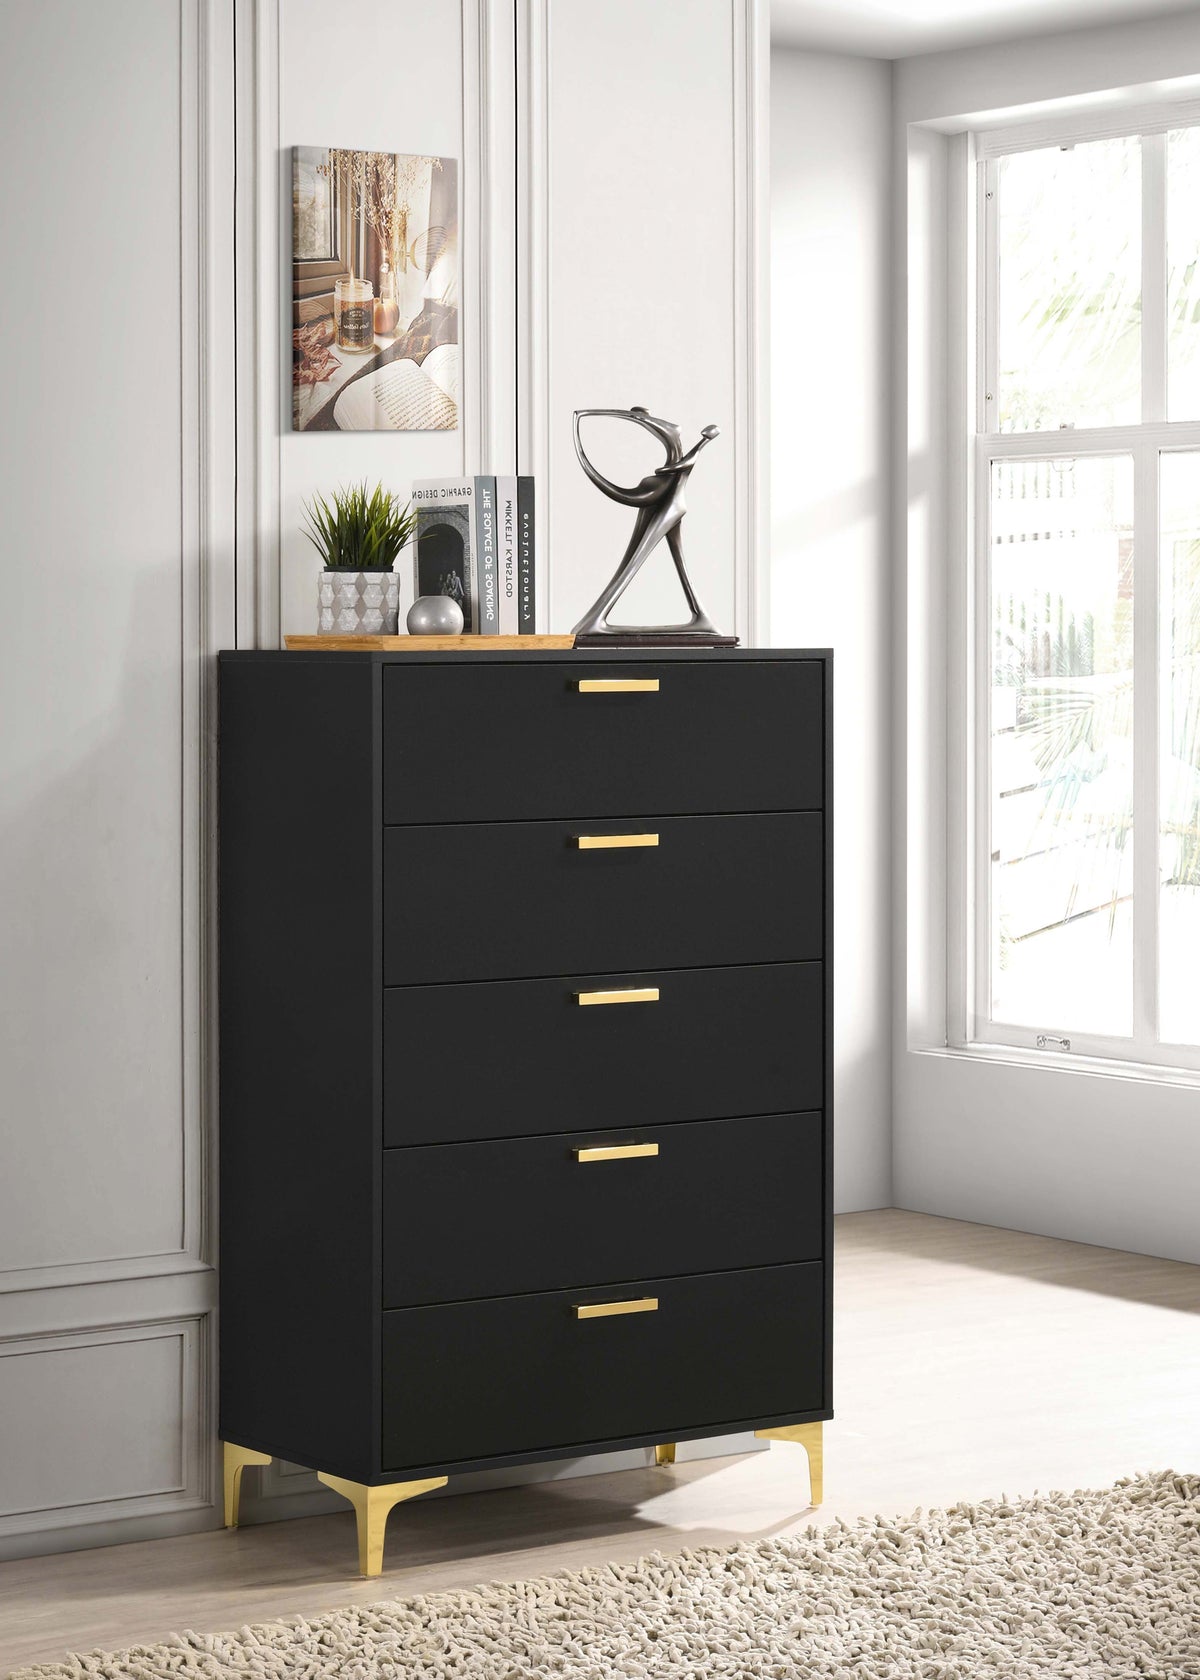 Kendall 5-drawer Chest Black and Gold Kendall 5-drawer Chest Black and Gold Half Price Furniture